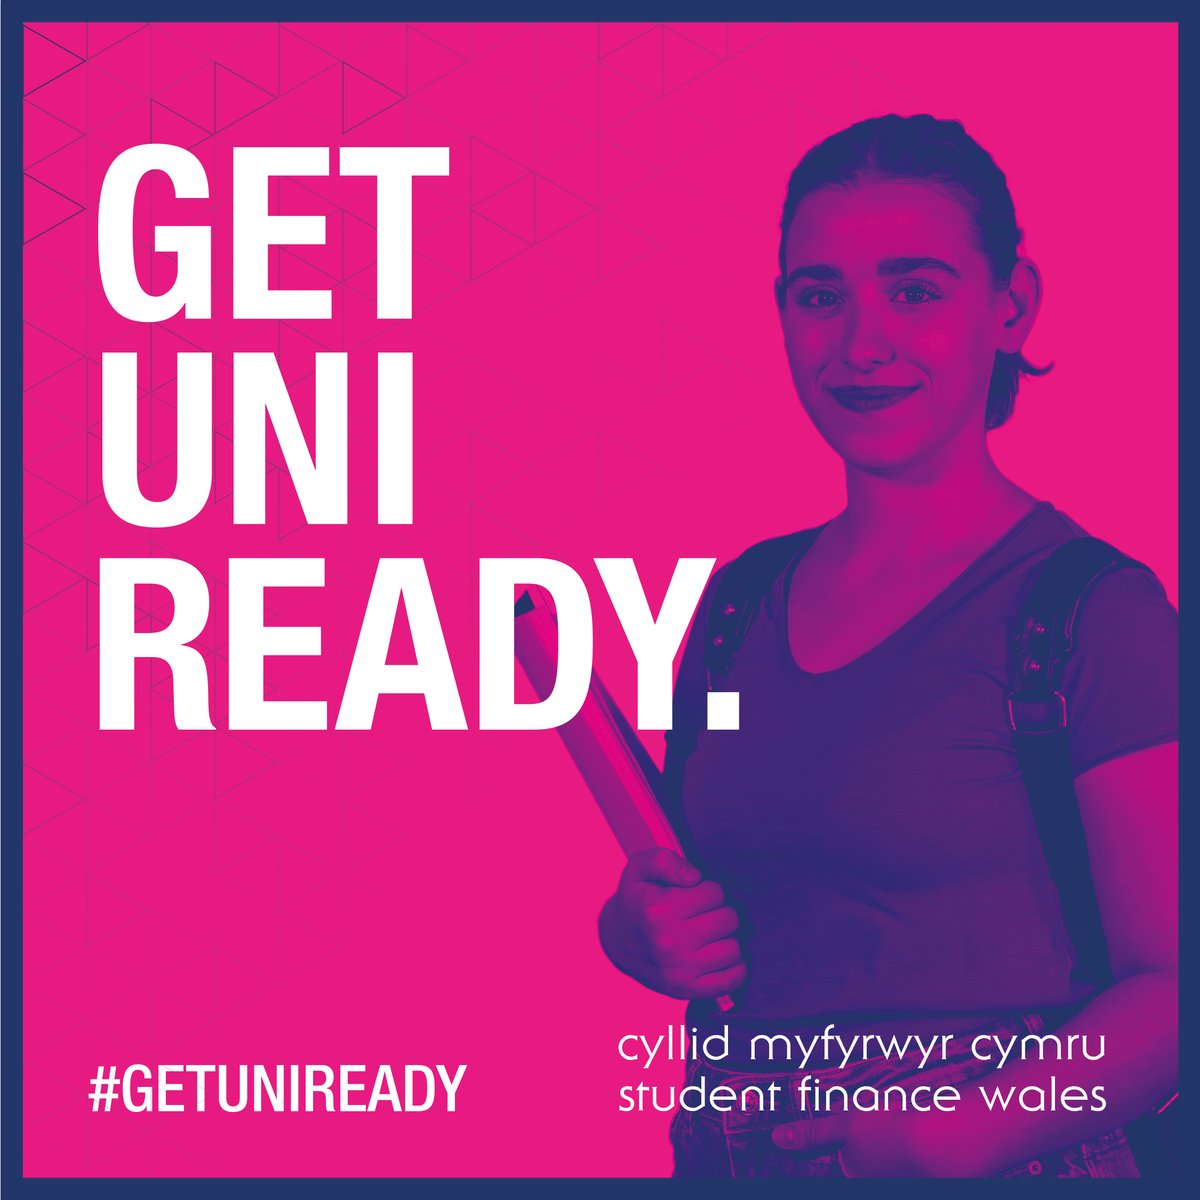 #GetUniReady for your exams knowing you’ve applied for your funding!

Apply before your exams to make sure you’re ready for uni! 

More info: studentfinancewales.co.uk/discover-stude…